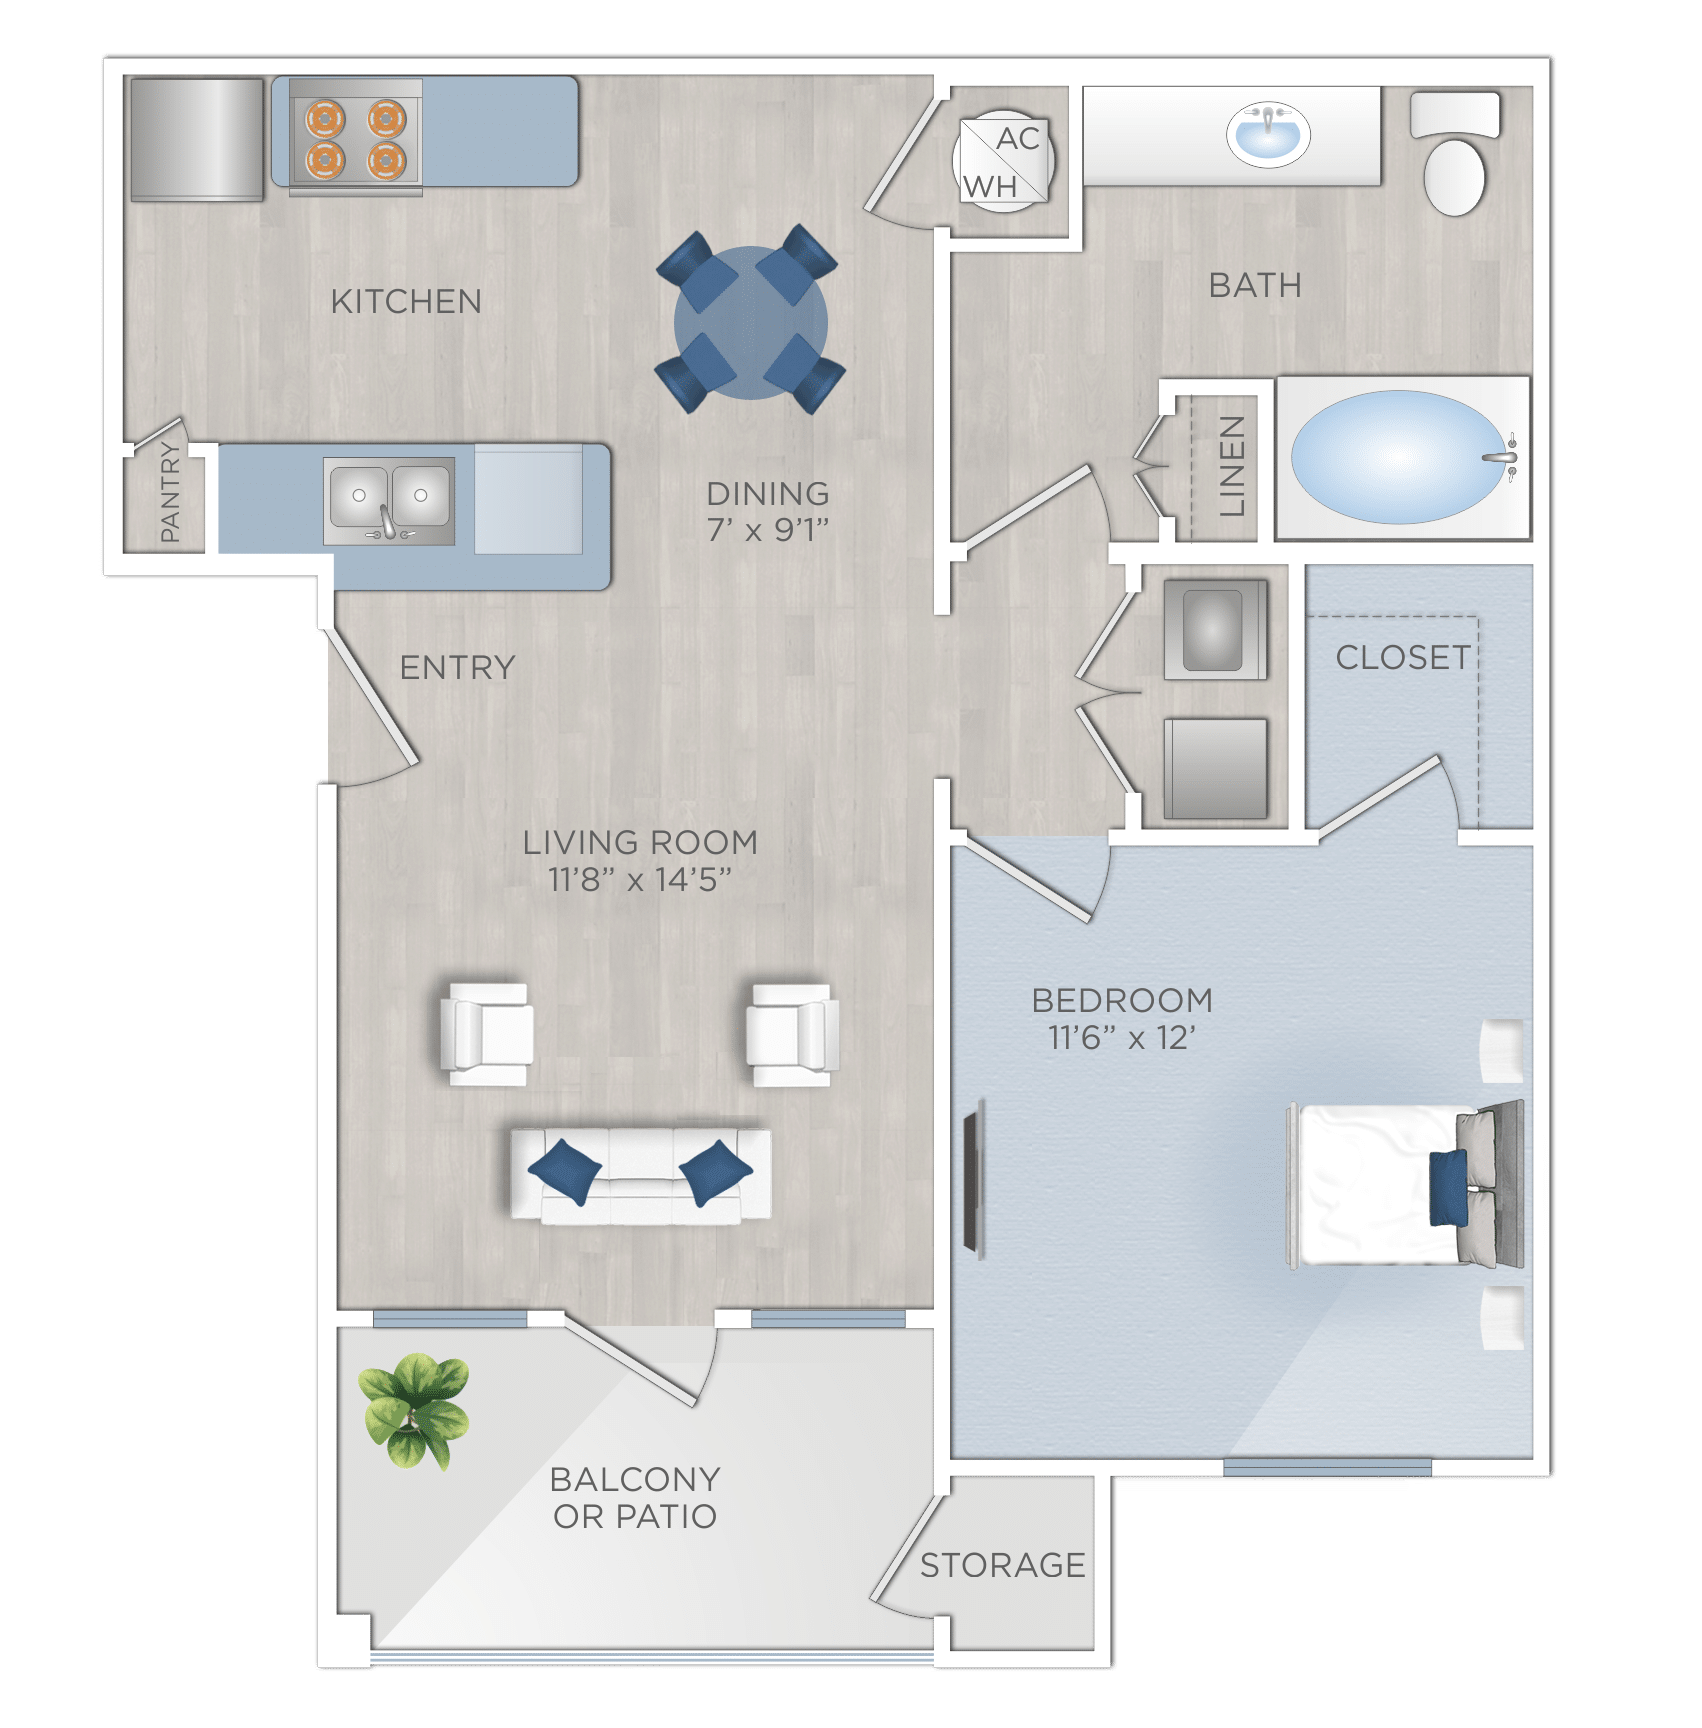 One Bedroom Apartments in Tomball, TX - The Preserve at Spring Creek - A1